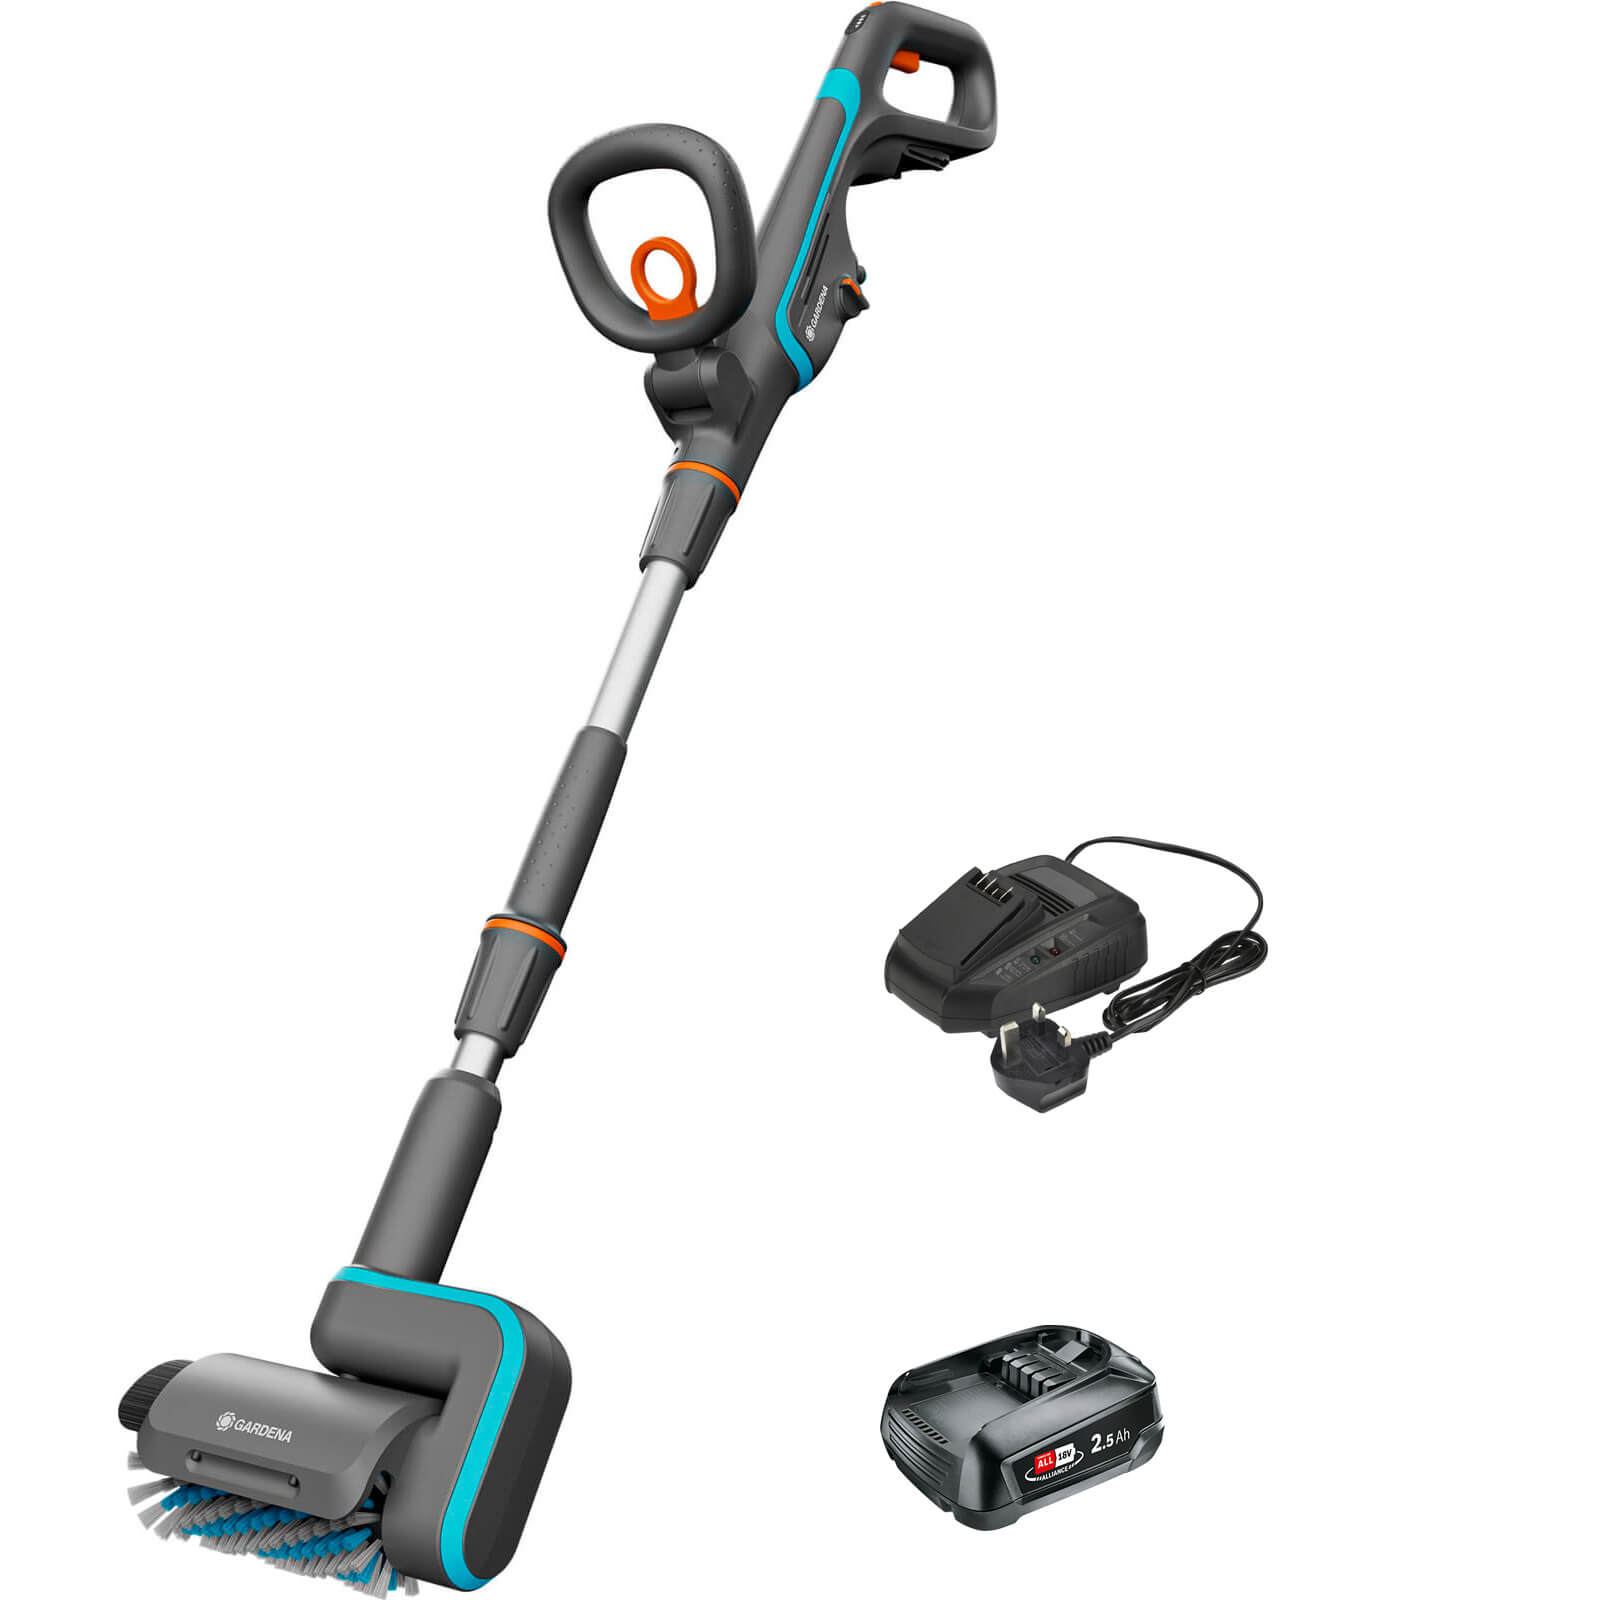 Gardena AQUABRUSH P4A 18v Cordless Patio and Surface Cleaner 1 x 2.5ah Li-ion Charger